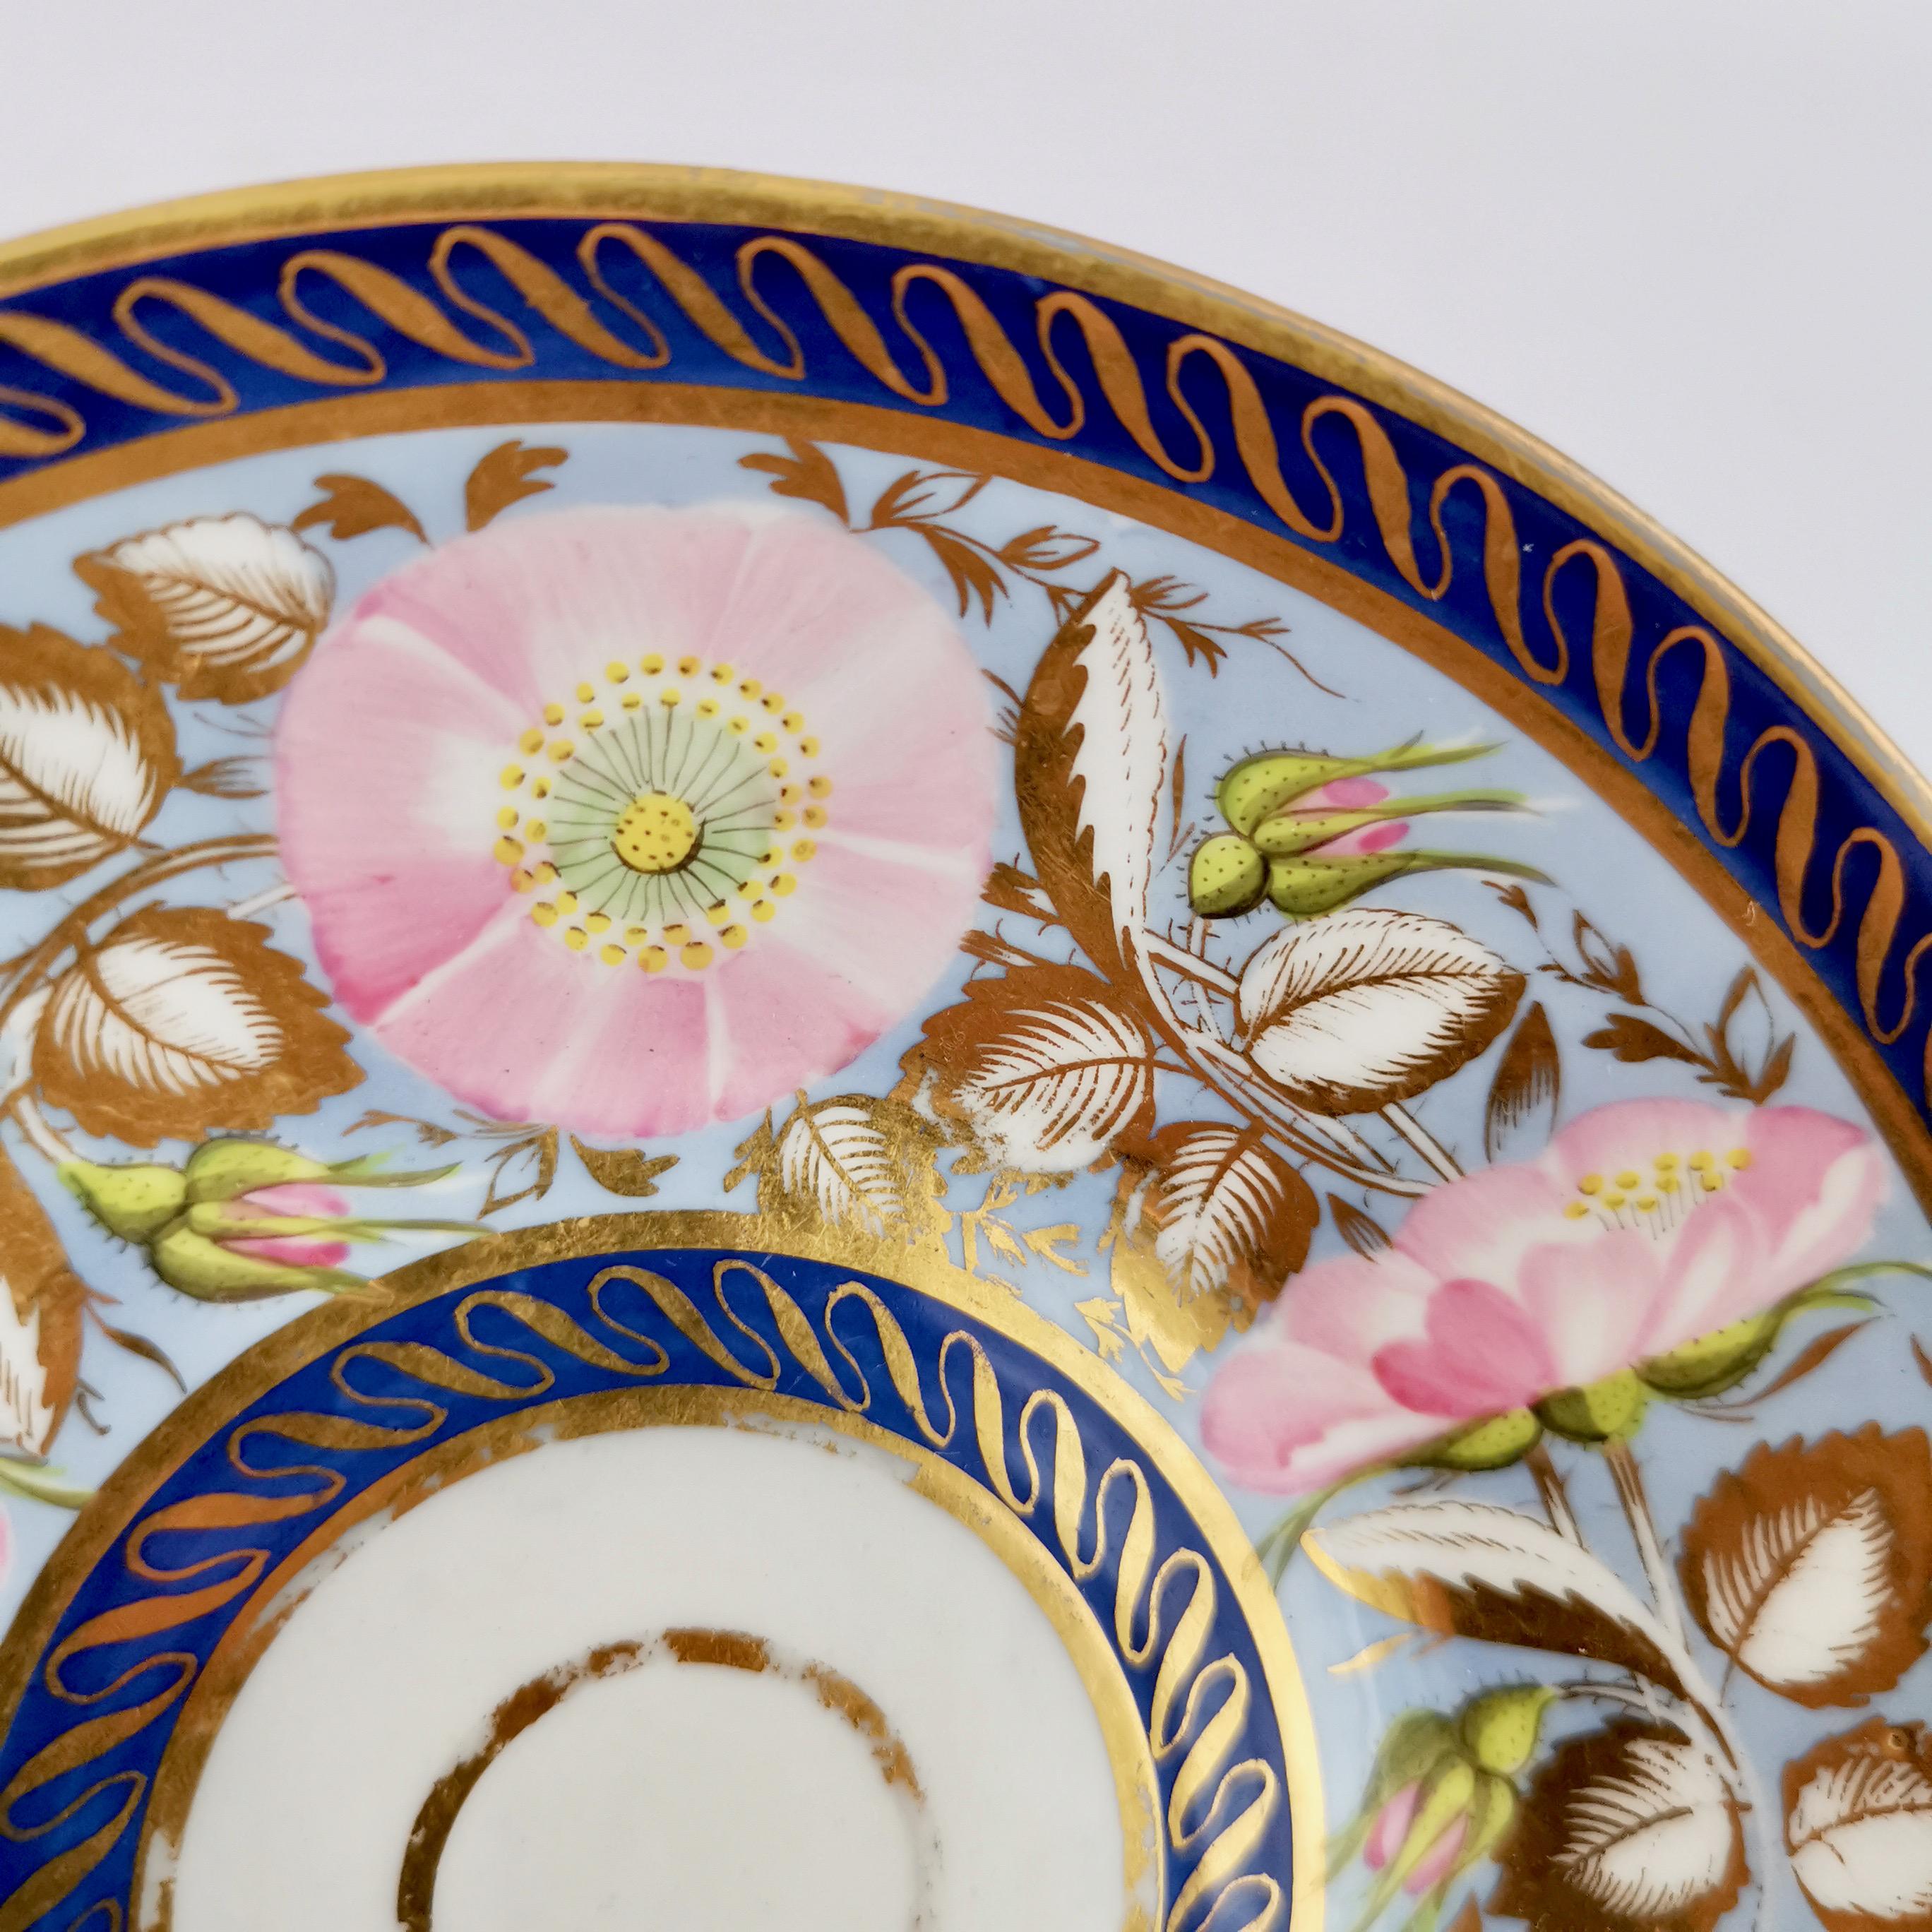 Anstice Horton & Rose Coffee Cup, Periwinkle and Pink Roses, Regency ca 1812 2